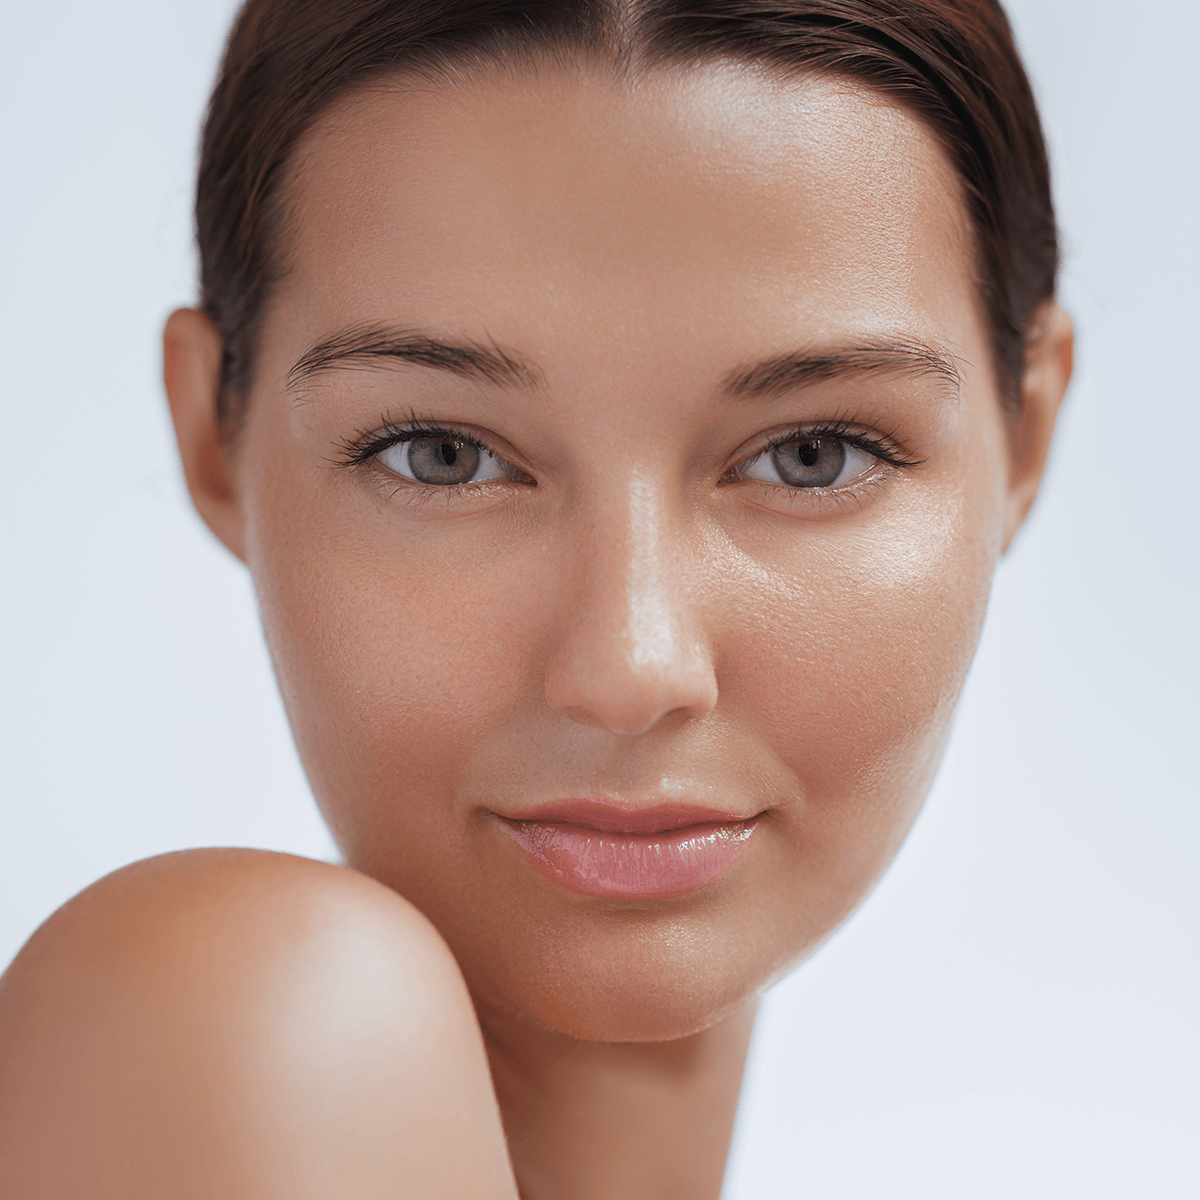 Young woman with clear glowing skin